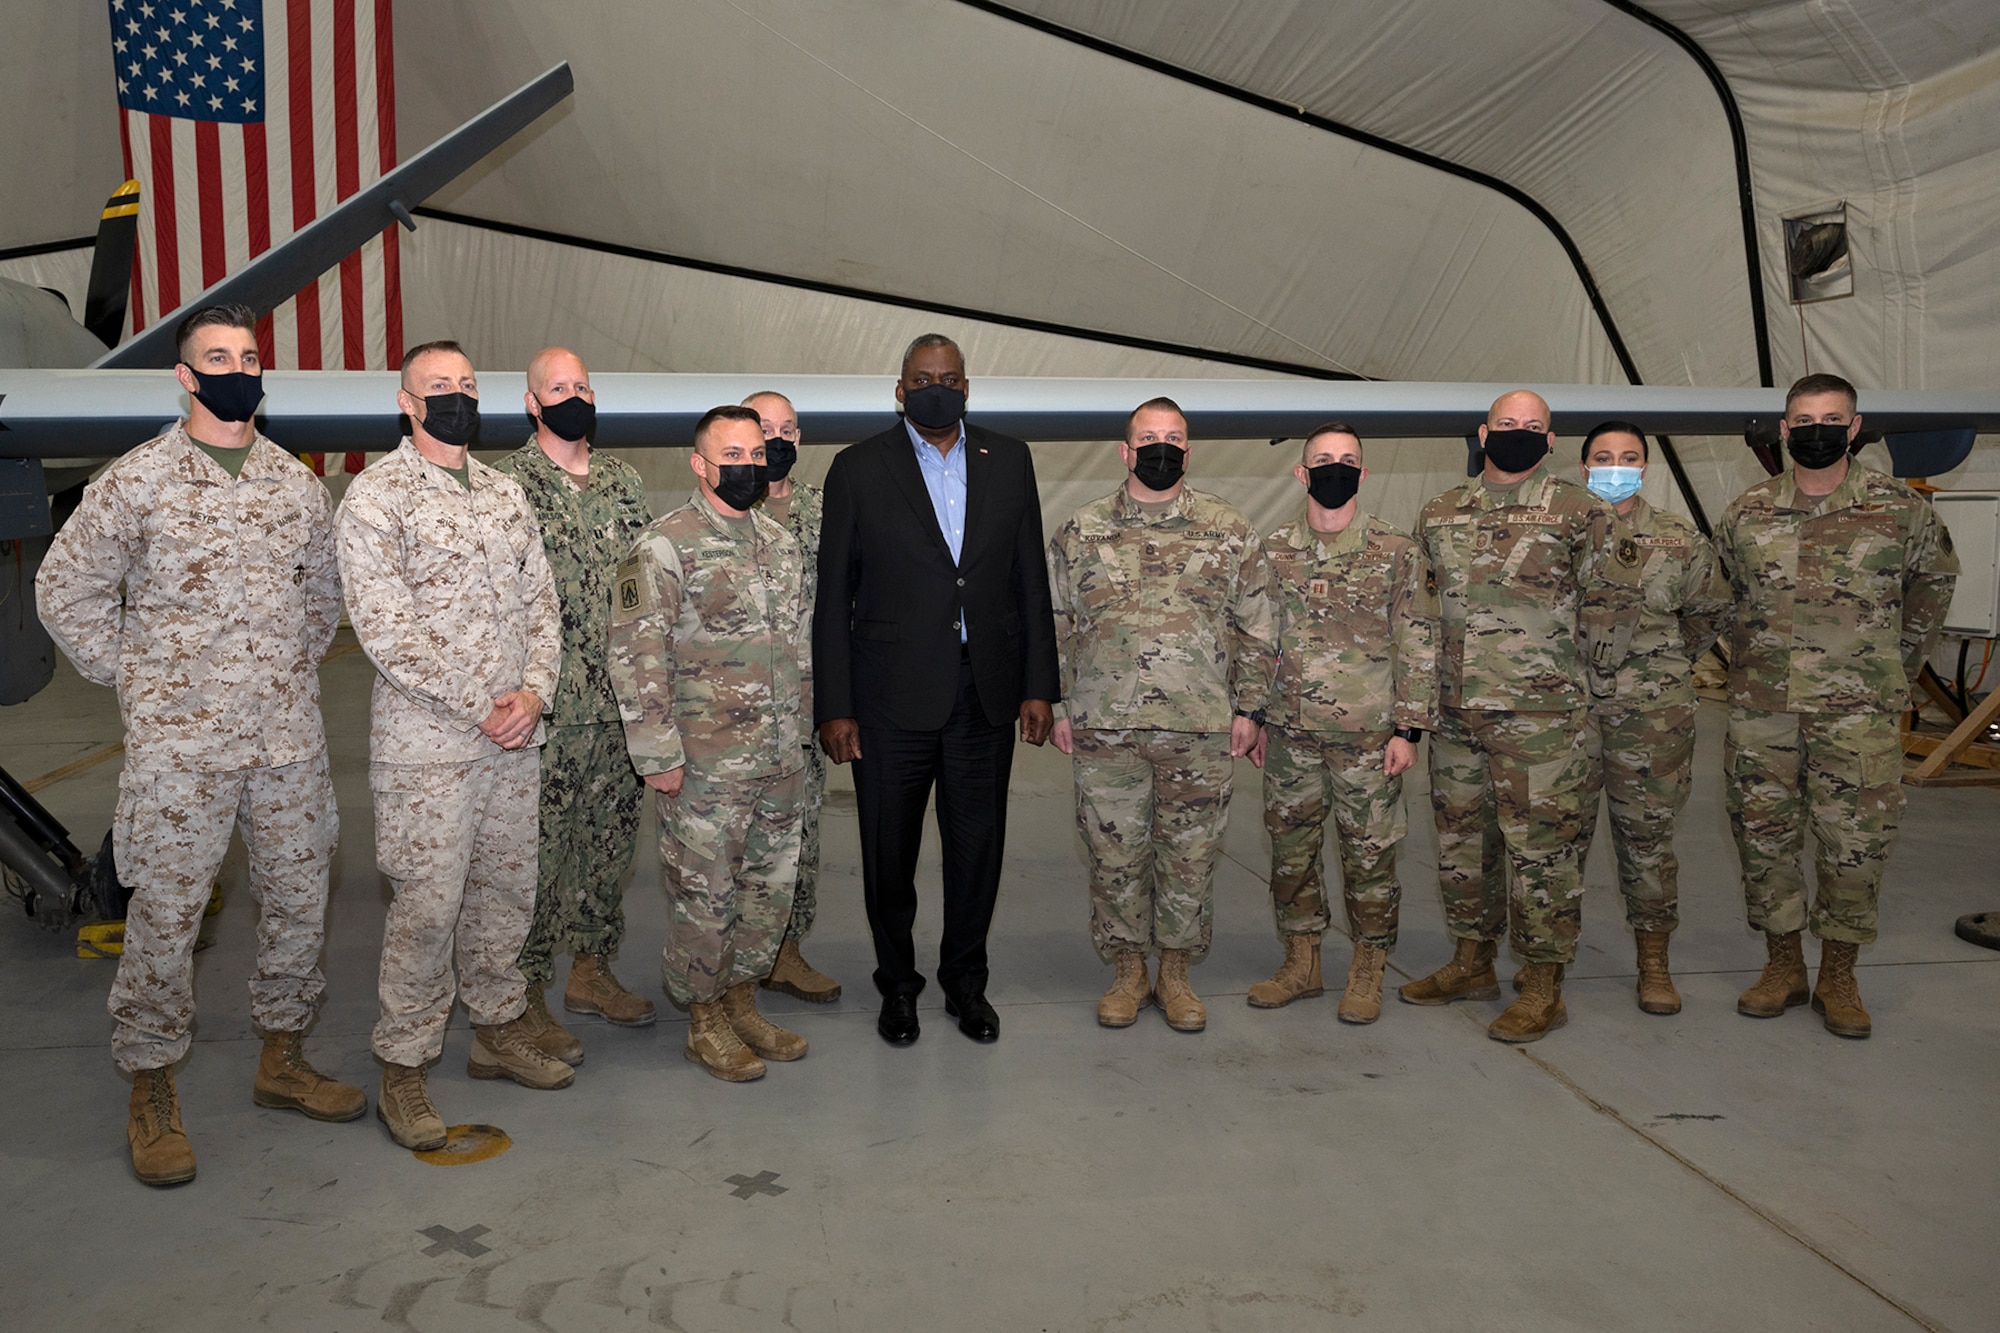 Secretary of Defense Lloyd J. Austin III poses with military members at Al Dhafra Air Base, United Arab Emirates, Nov. 22, 2021. Austin Traveled to the UAE to meet with senior government officials to reaffirm the US-UAE strategic partnership.